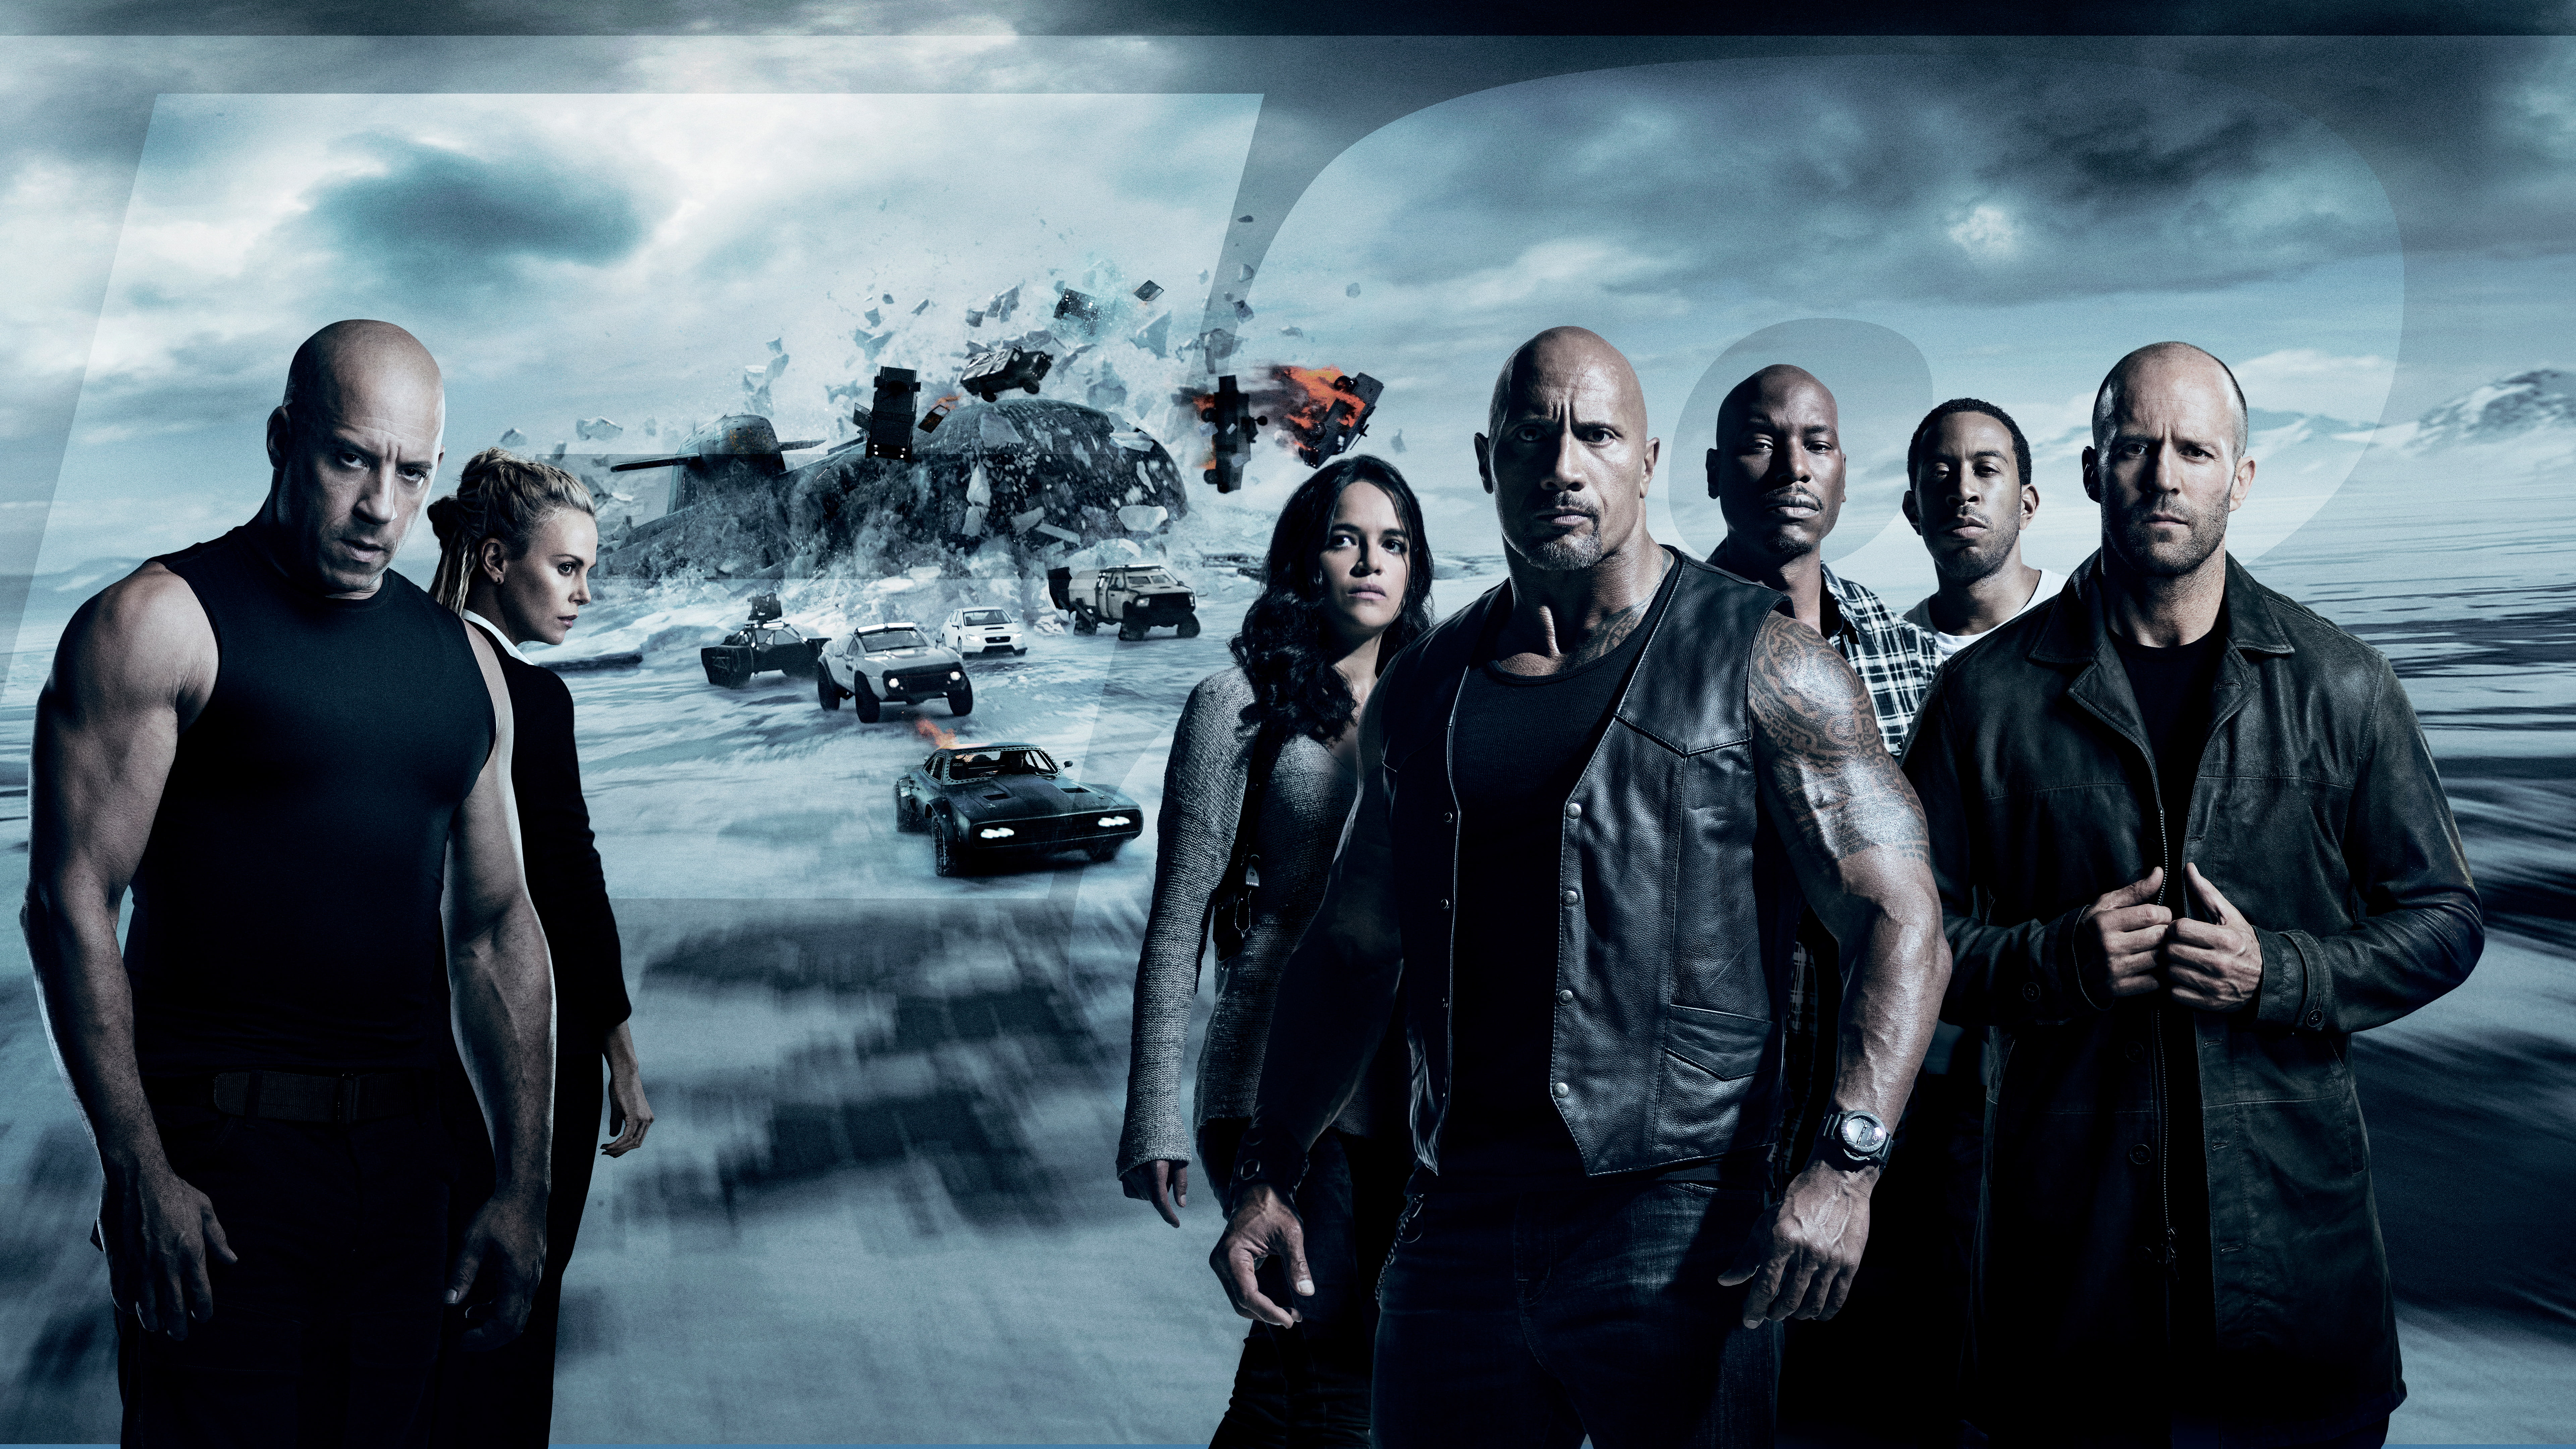 Vin Diesel, Jason Statham, Tyrese Gibson, The Fate of the Furious